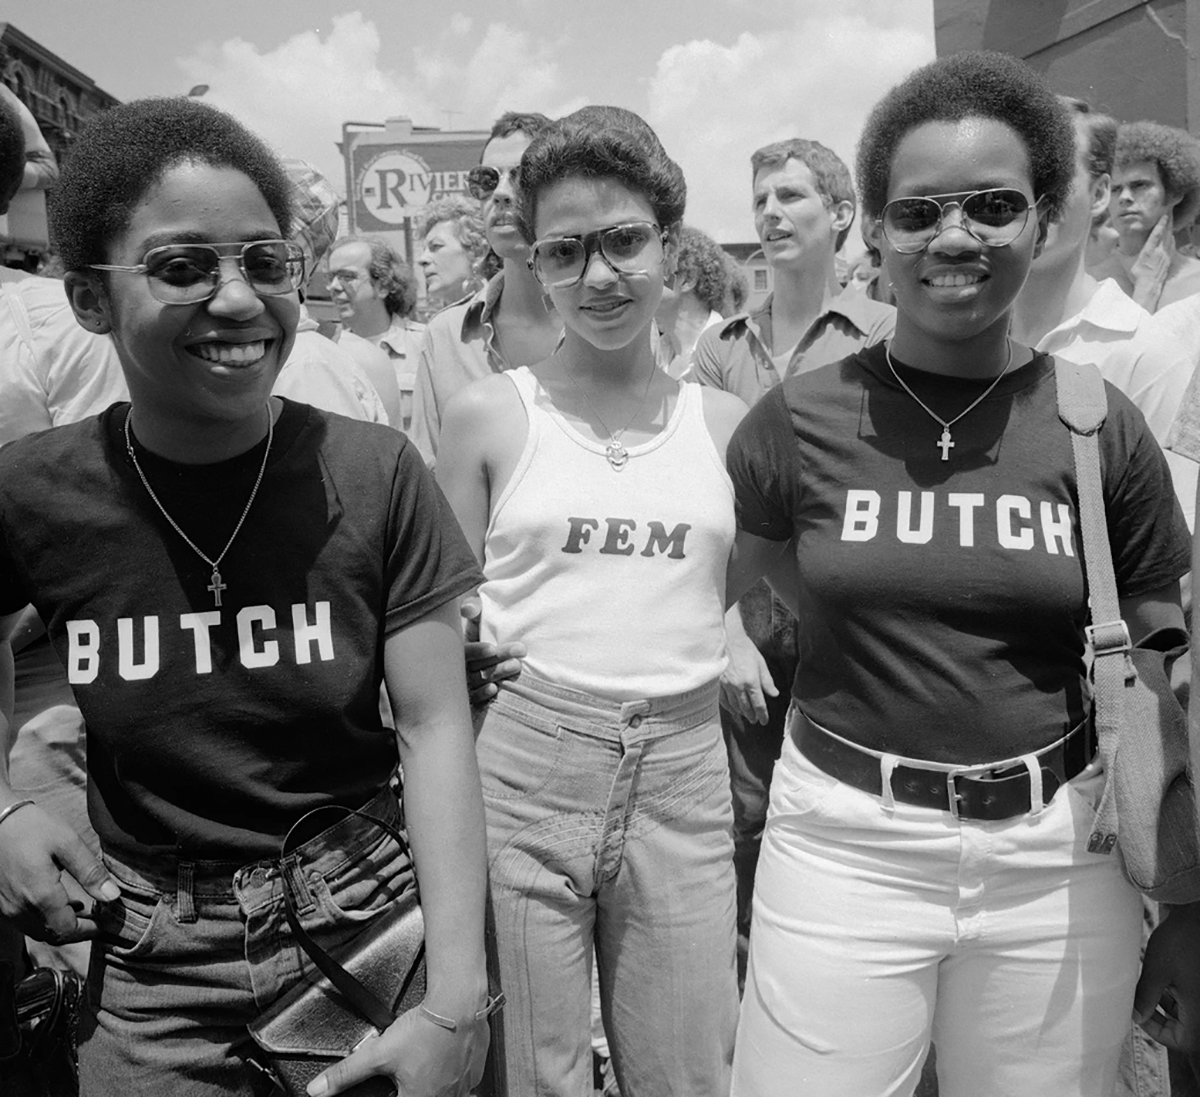 Three women at the 1977 New York City Pride Parade stand smiling in a black and white photo; the woman in the middle wears a white tank top with the word "Fem" across the front, the two women on either side of her wear identical black t-shirts that say "Butch"; Photo by Meryl Meisler